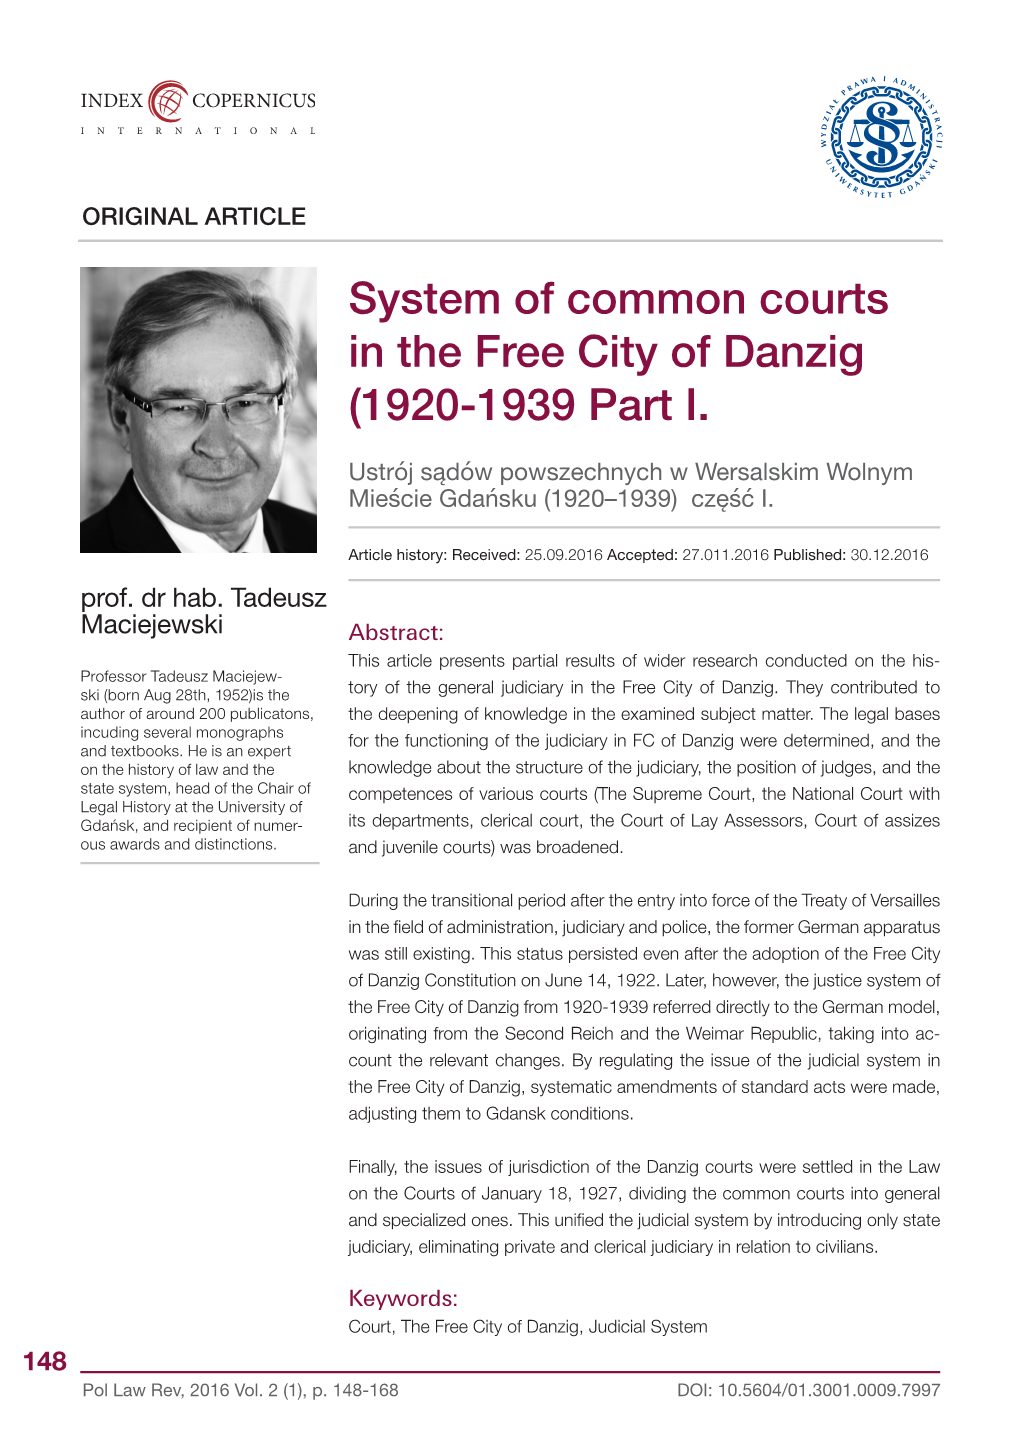 System of Common Courts in the Free City of Danzig (1920-1939 Part I